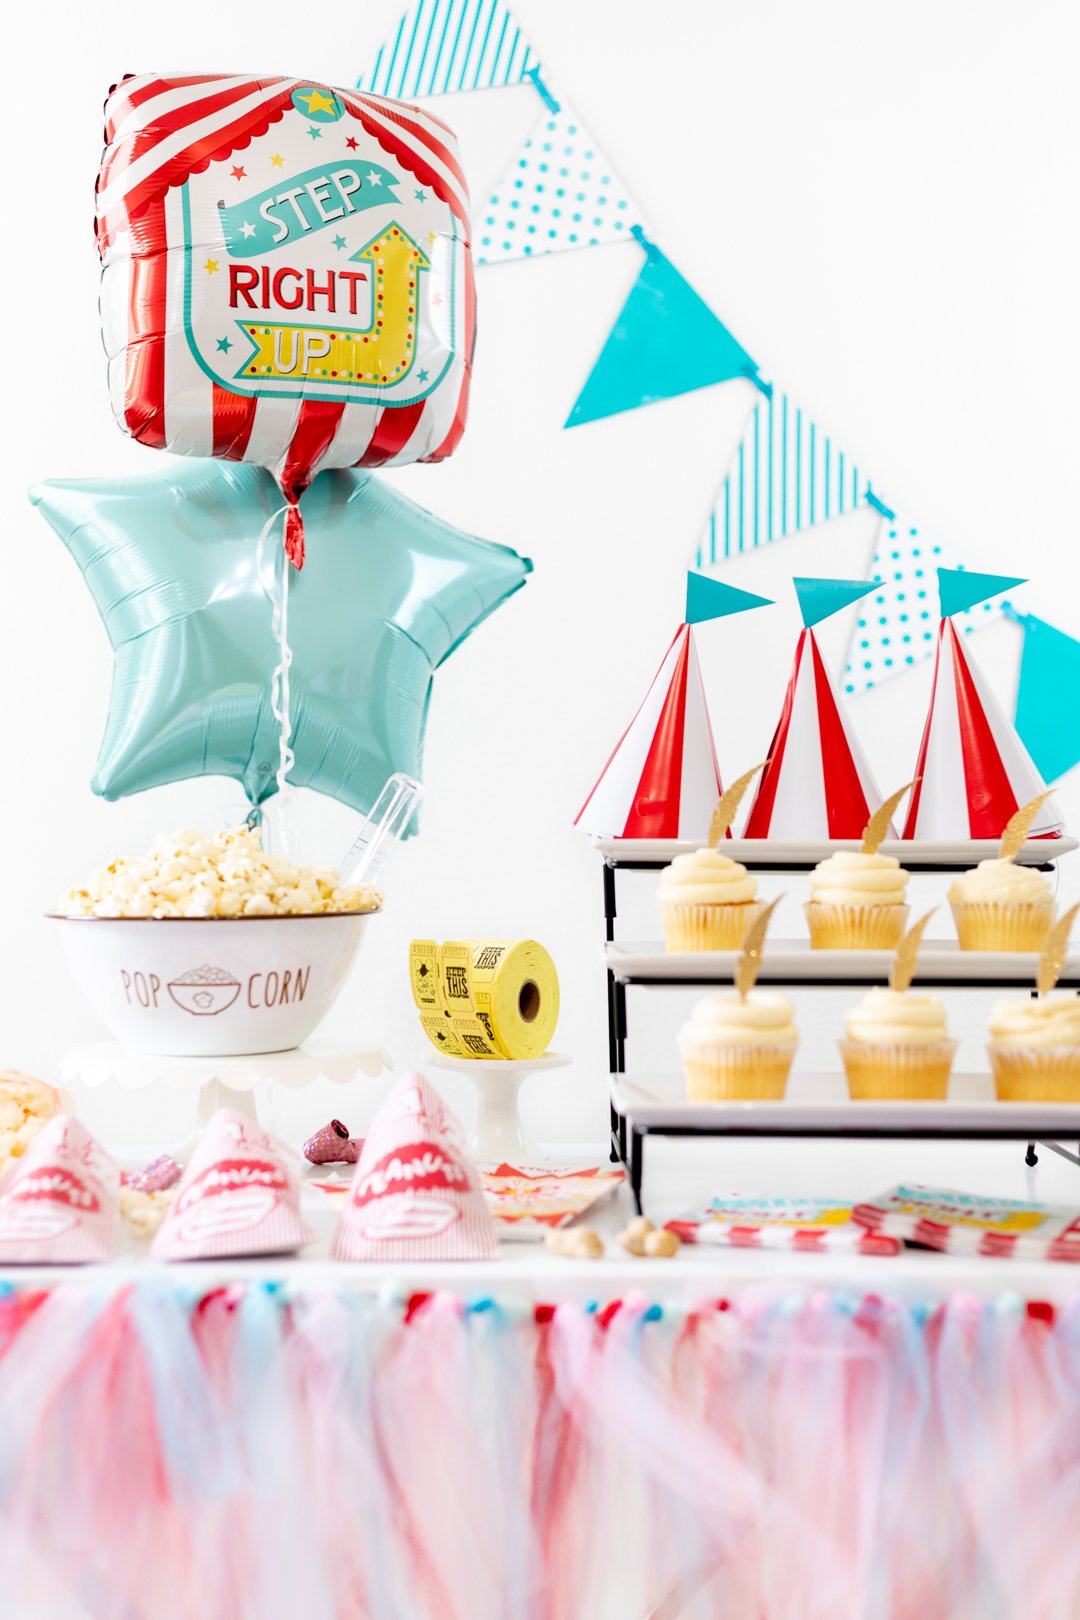 Carnival party table with cupcakes, balloons, popcorn and peanuts